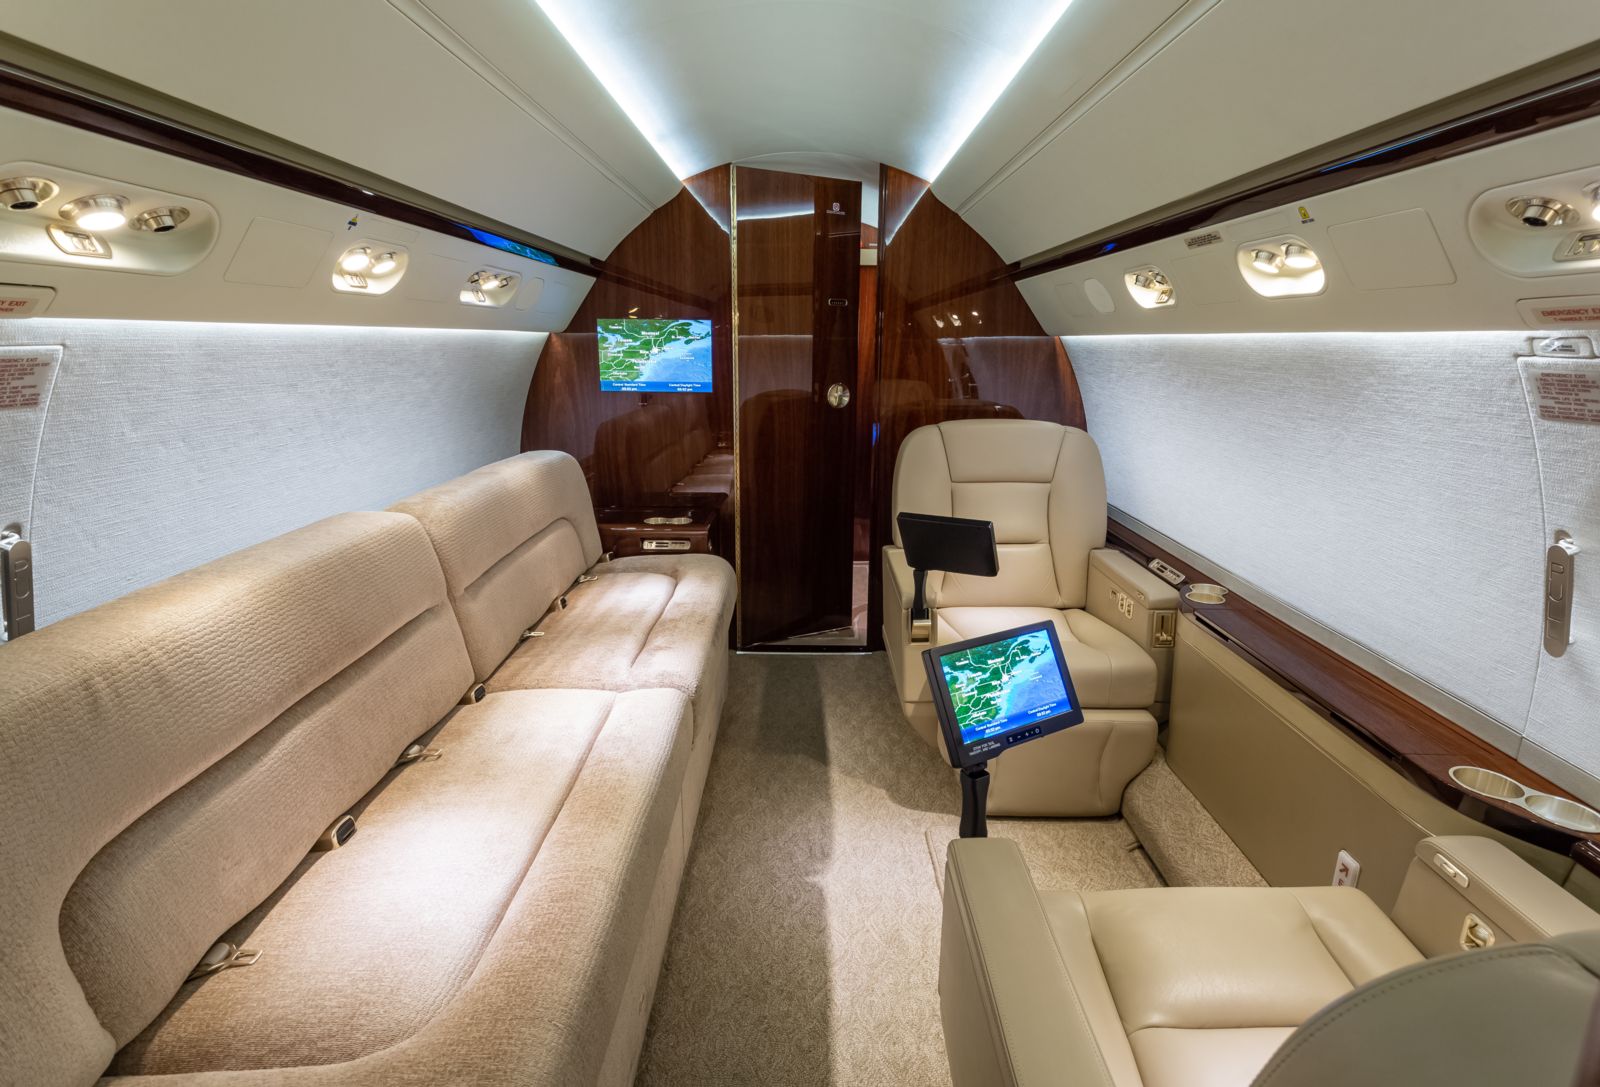 Gulfstream G550  S/N 5438 for sale | gallery image: /userfiles/images/5438/bfp_6354.jpg